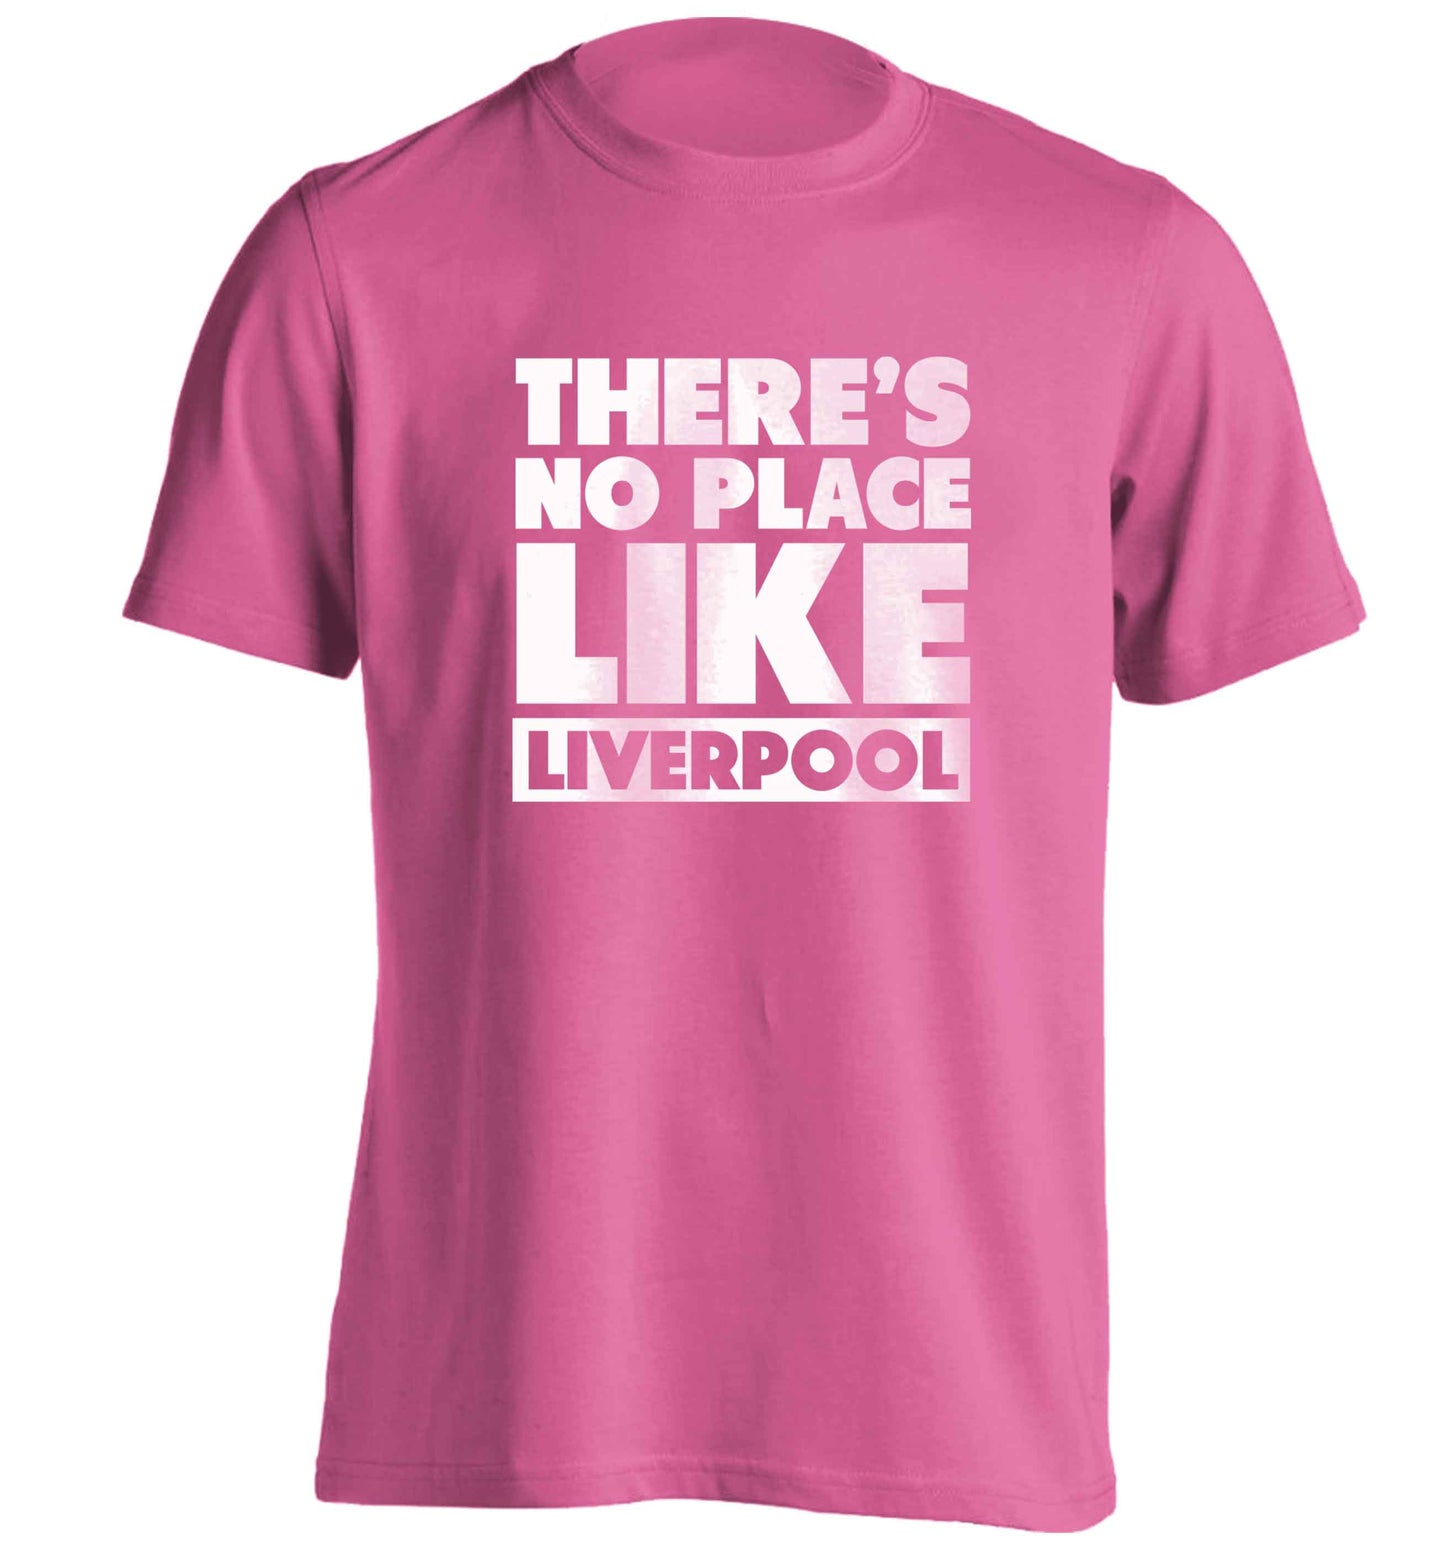 There's no place like Liverpool adults unisex pink Tshirt 2XL